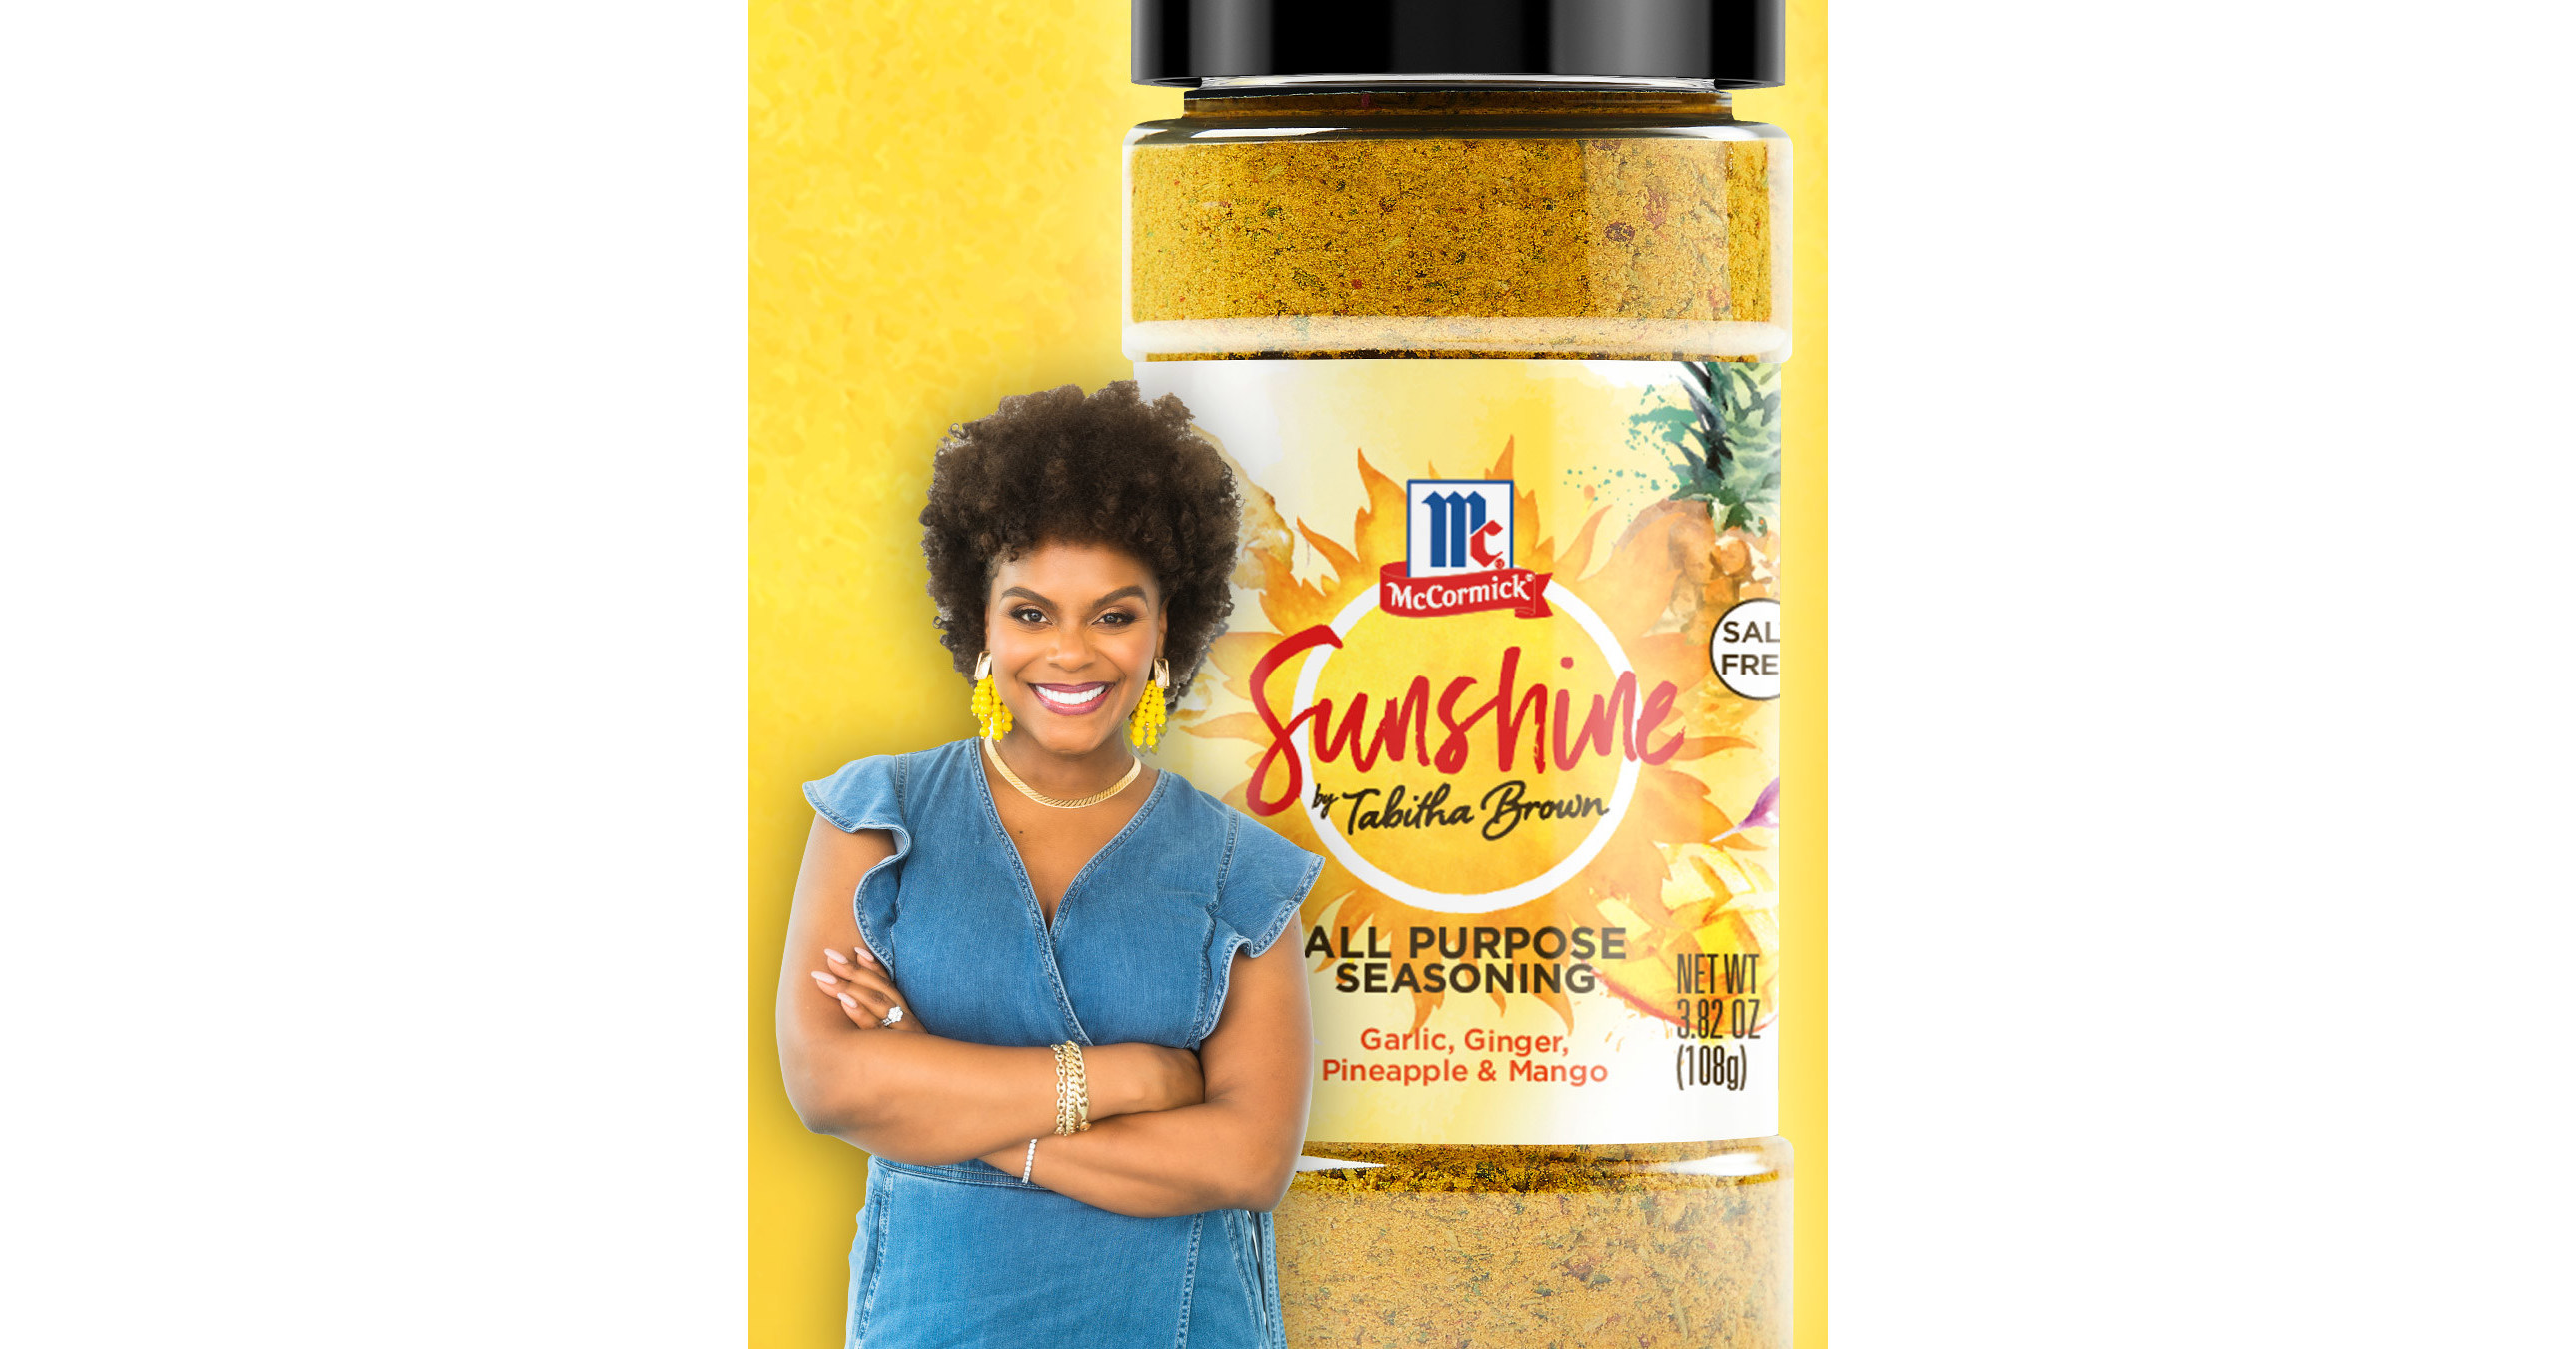 Tabitha Brown Partners with McCormick® to Release an Exclusive New Seasoning  Just in Time for Summer 2021 - Jul 8, 2021